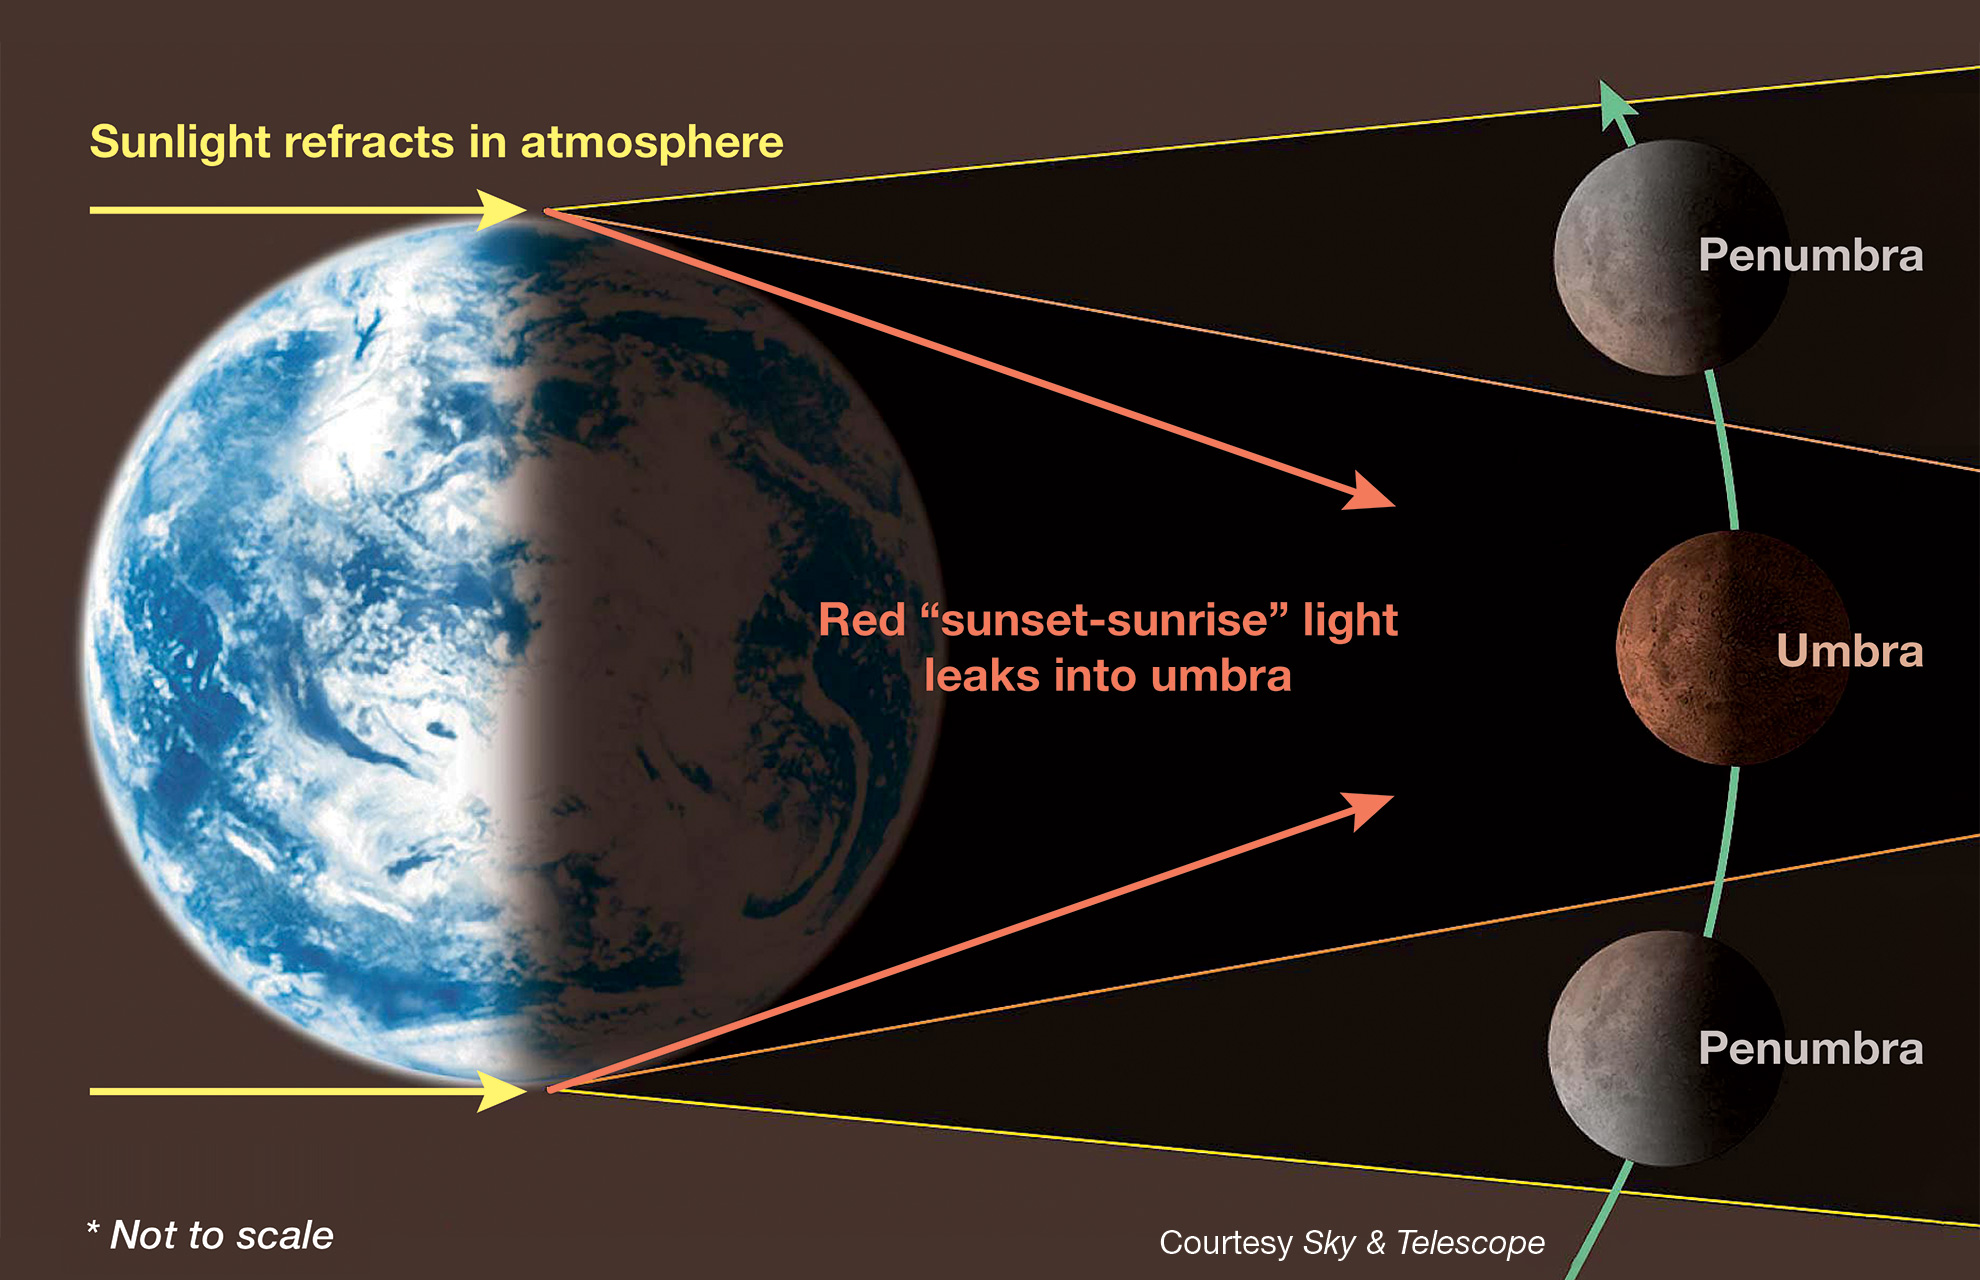 Everything You Need to Know for the May 26th Morning Lunar Eclipse